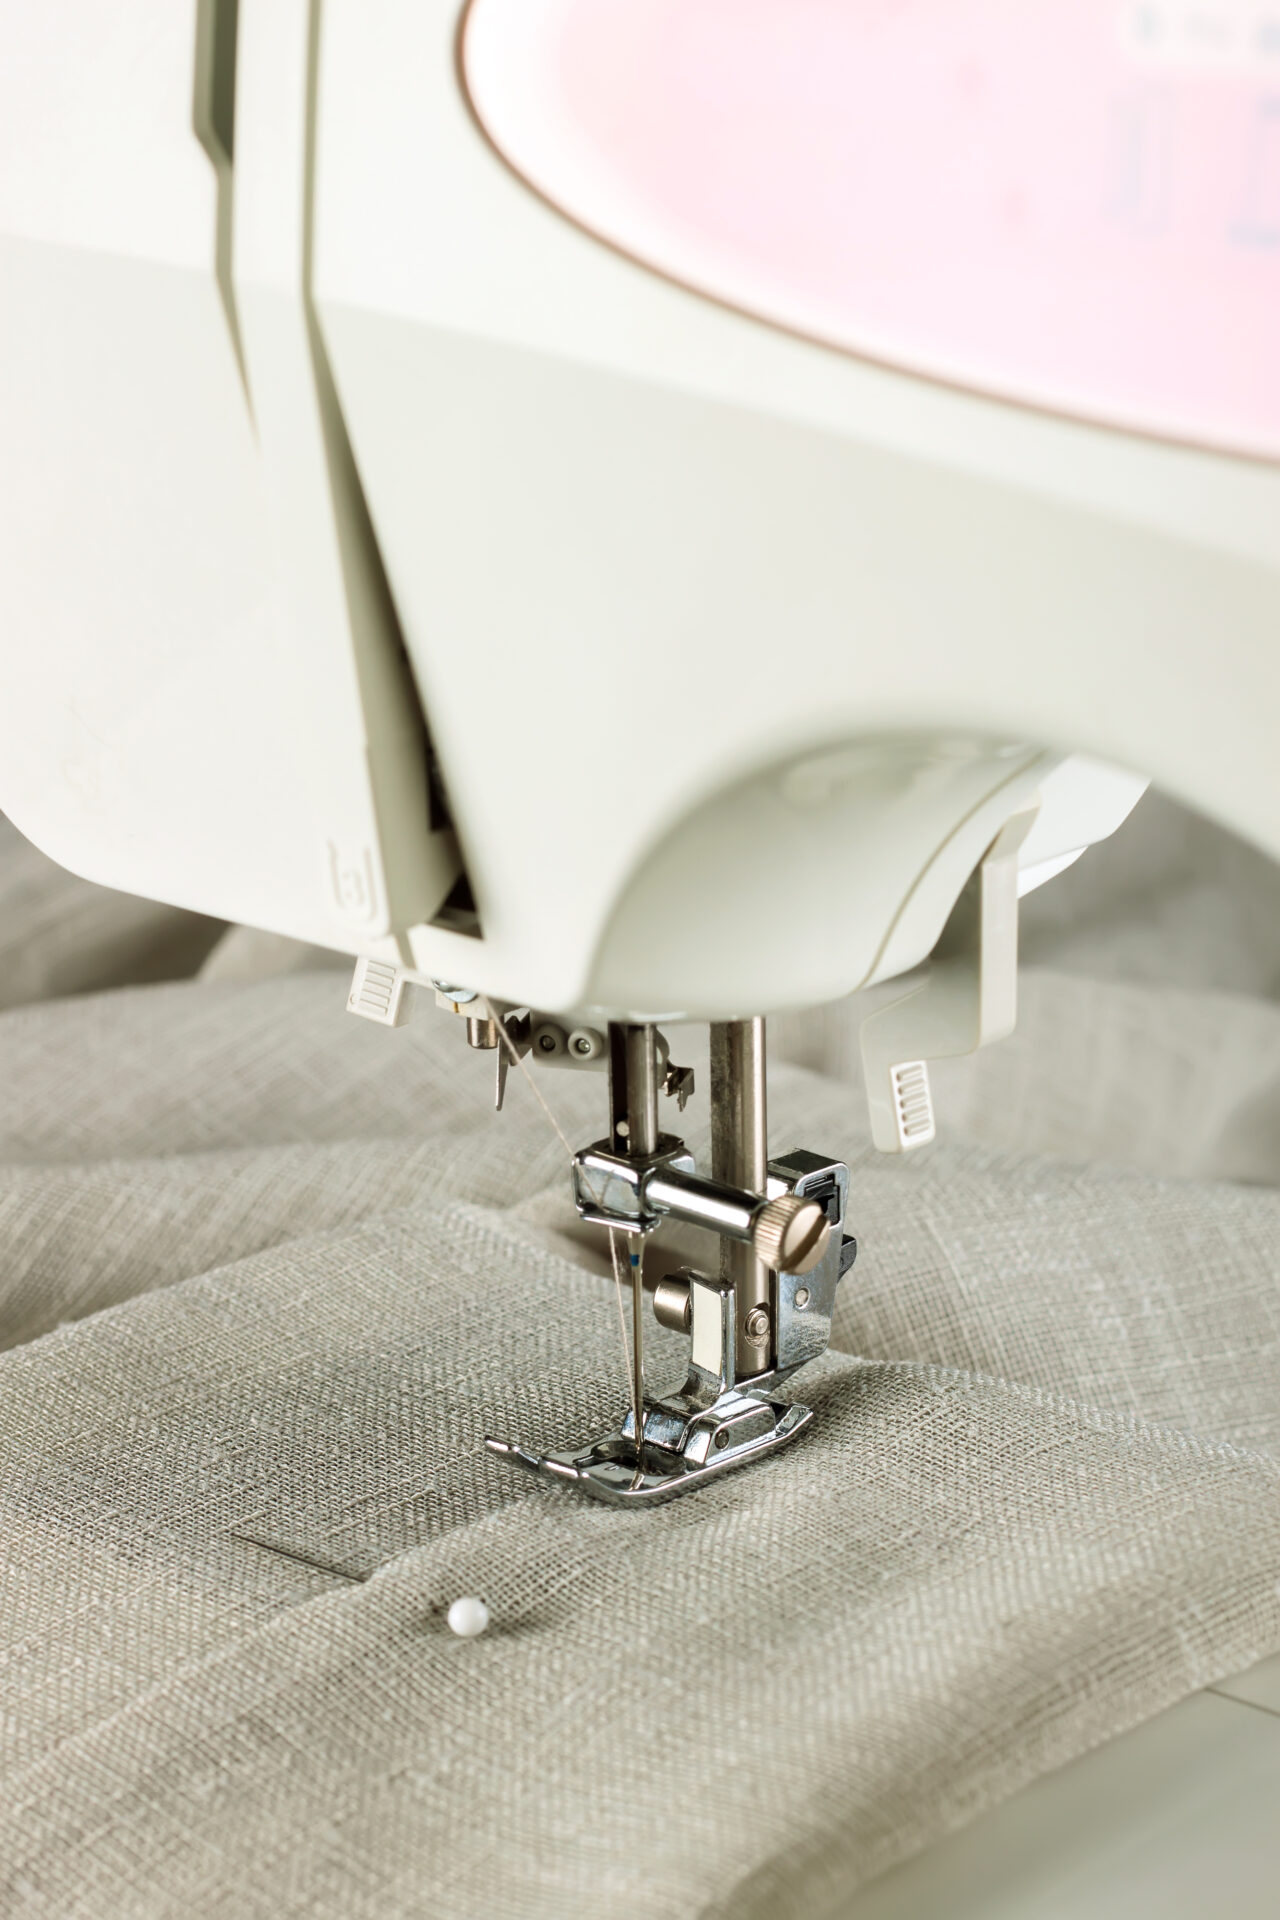 The modern sewing machine and item of clothing